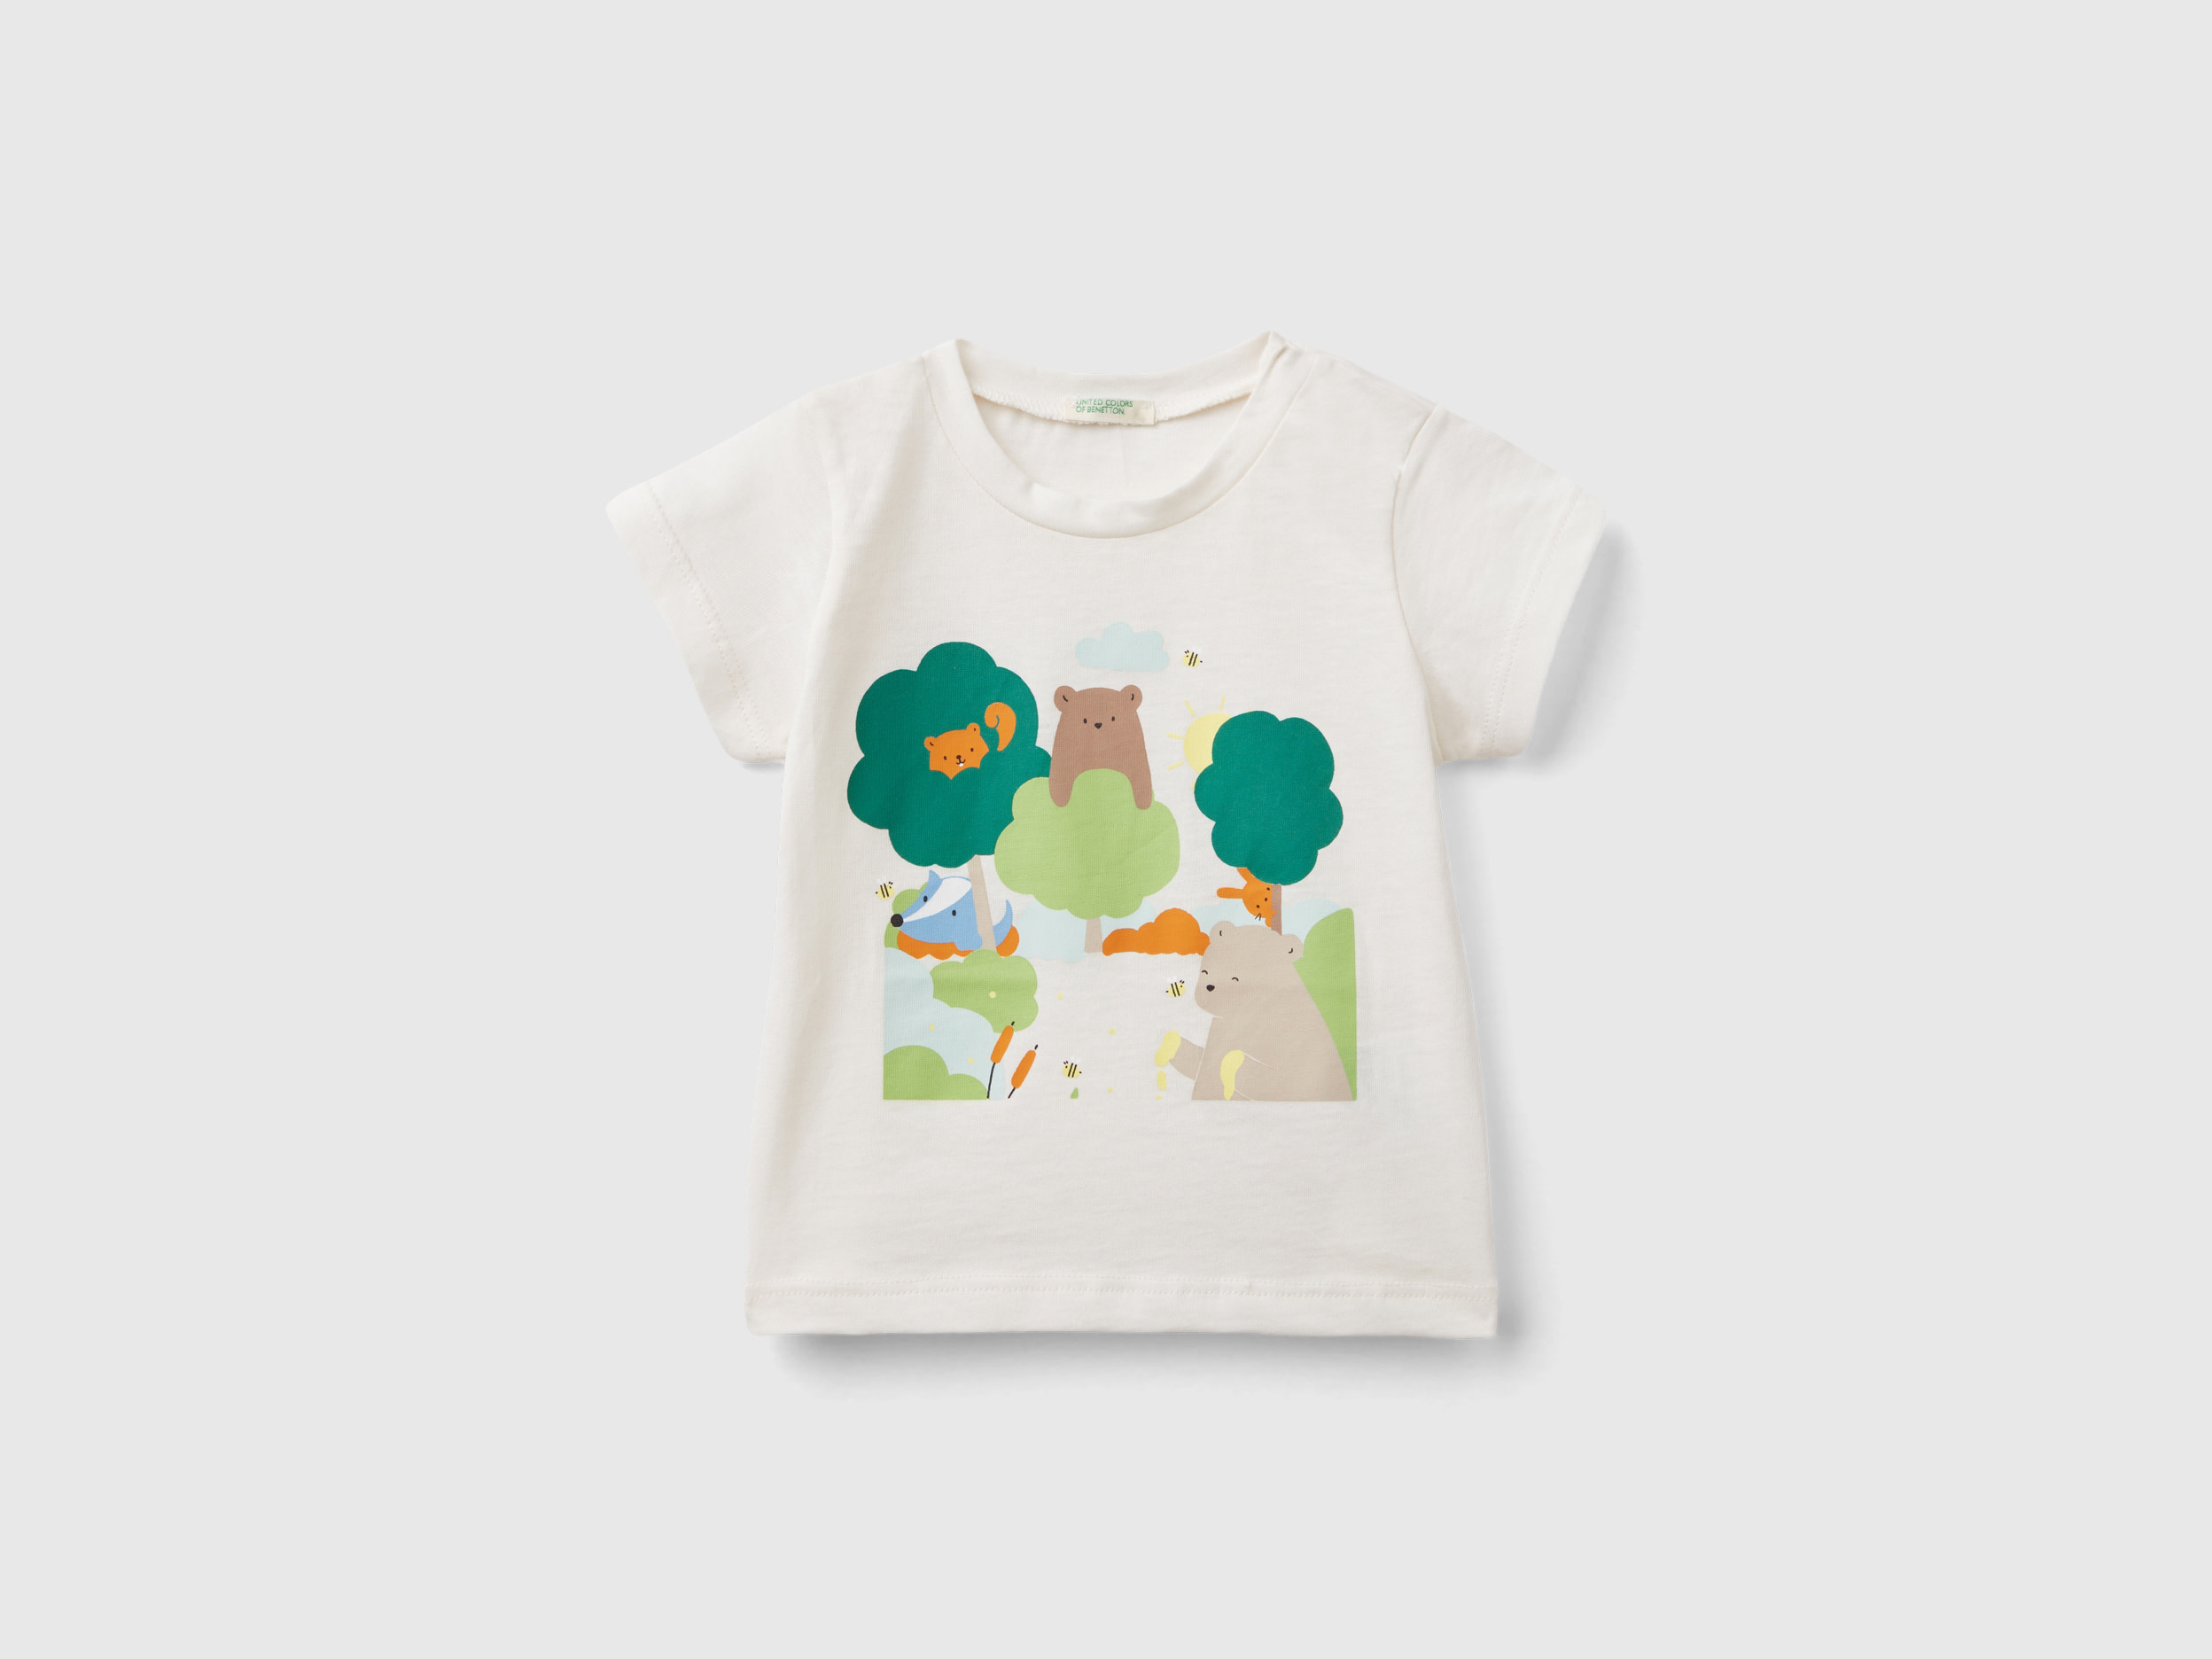 Benetton, T-shirt In Organic Cotton With Print, size 6-9, Creamy White, Kids